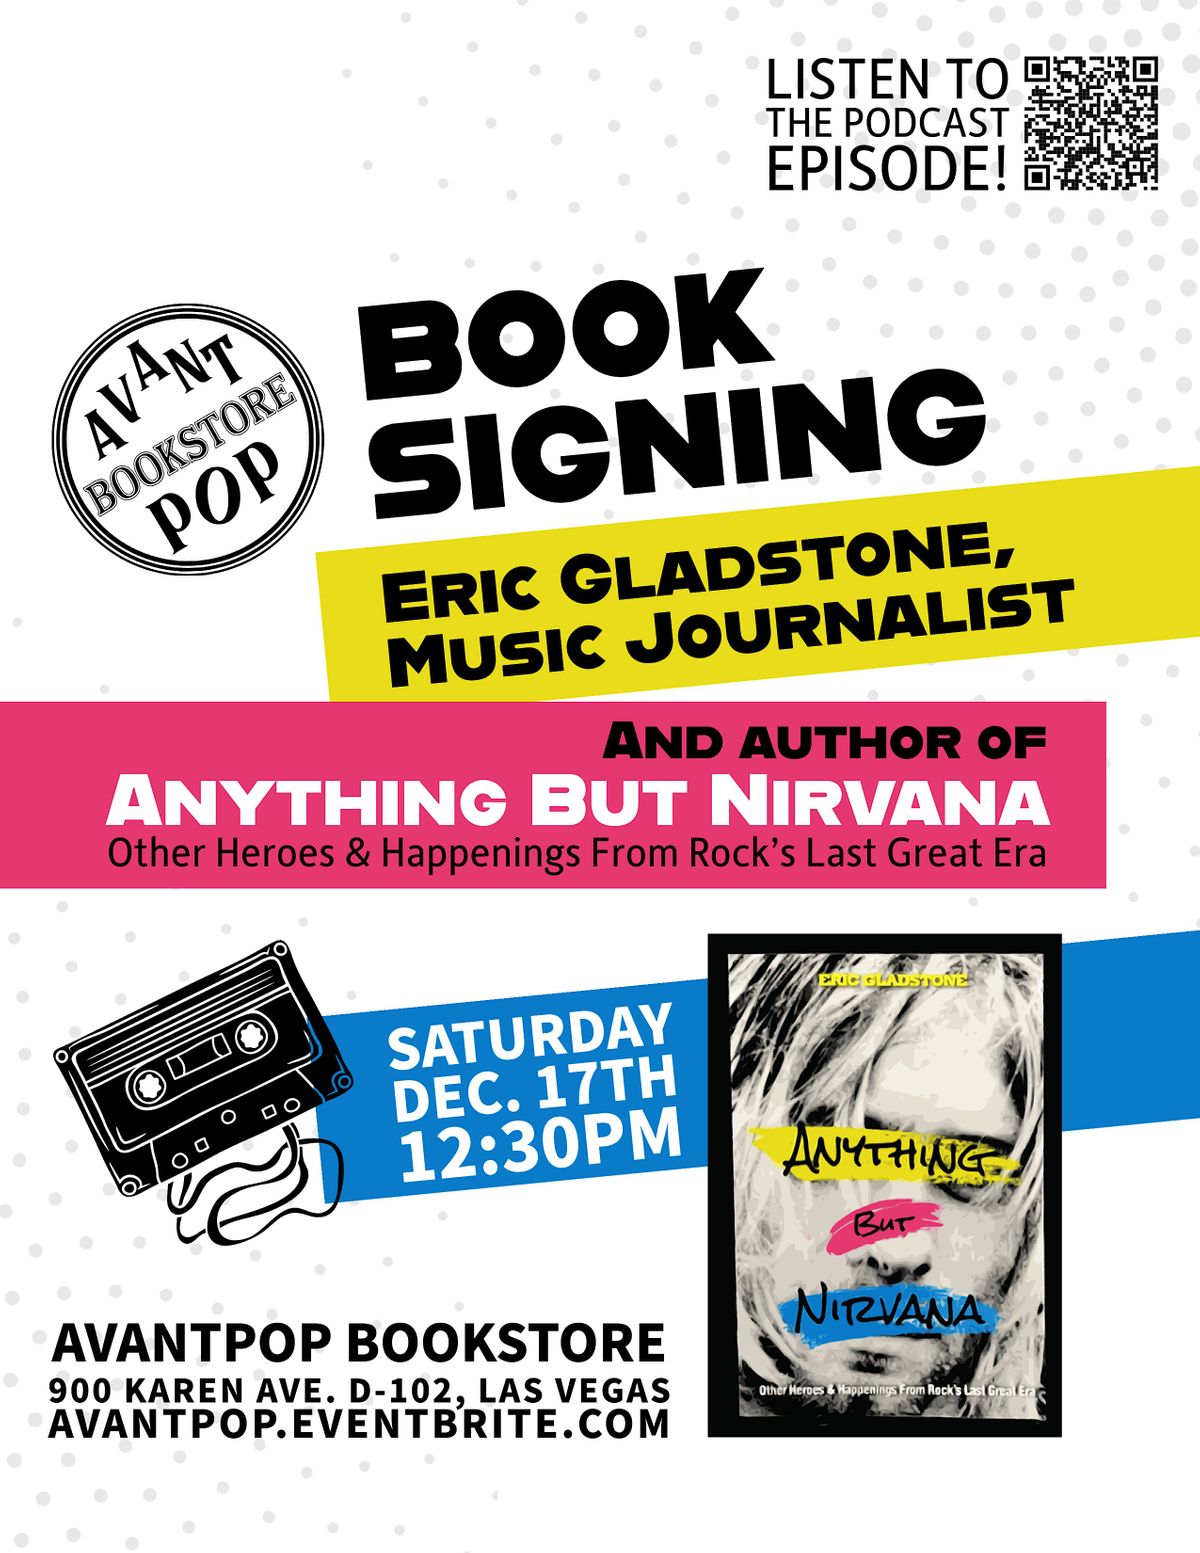 Book Signing with Eric Gladstone Author of "Anything But Nirvana"